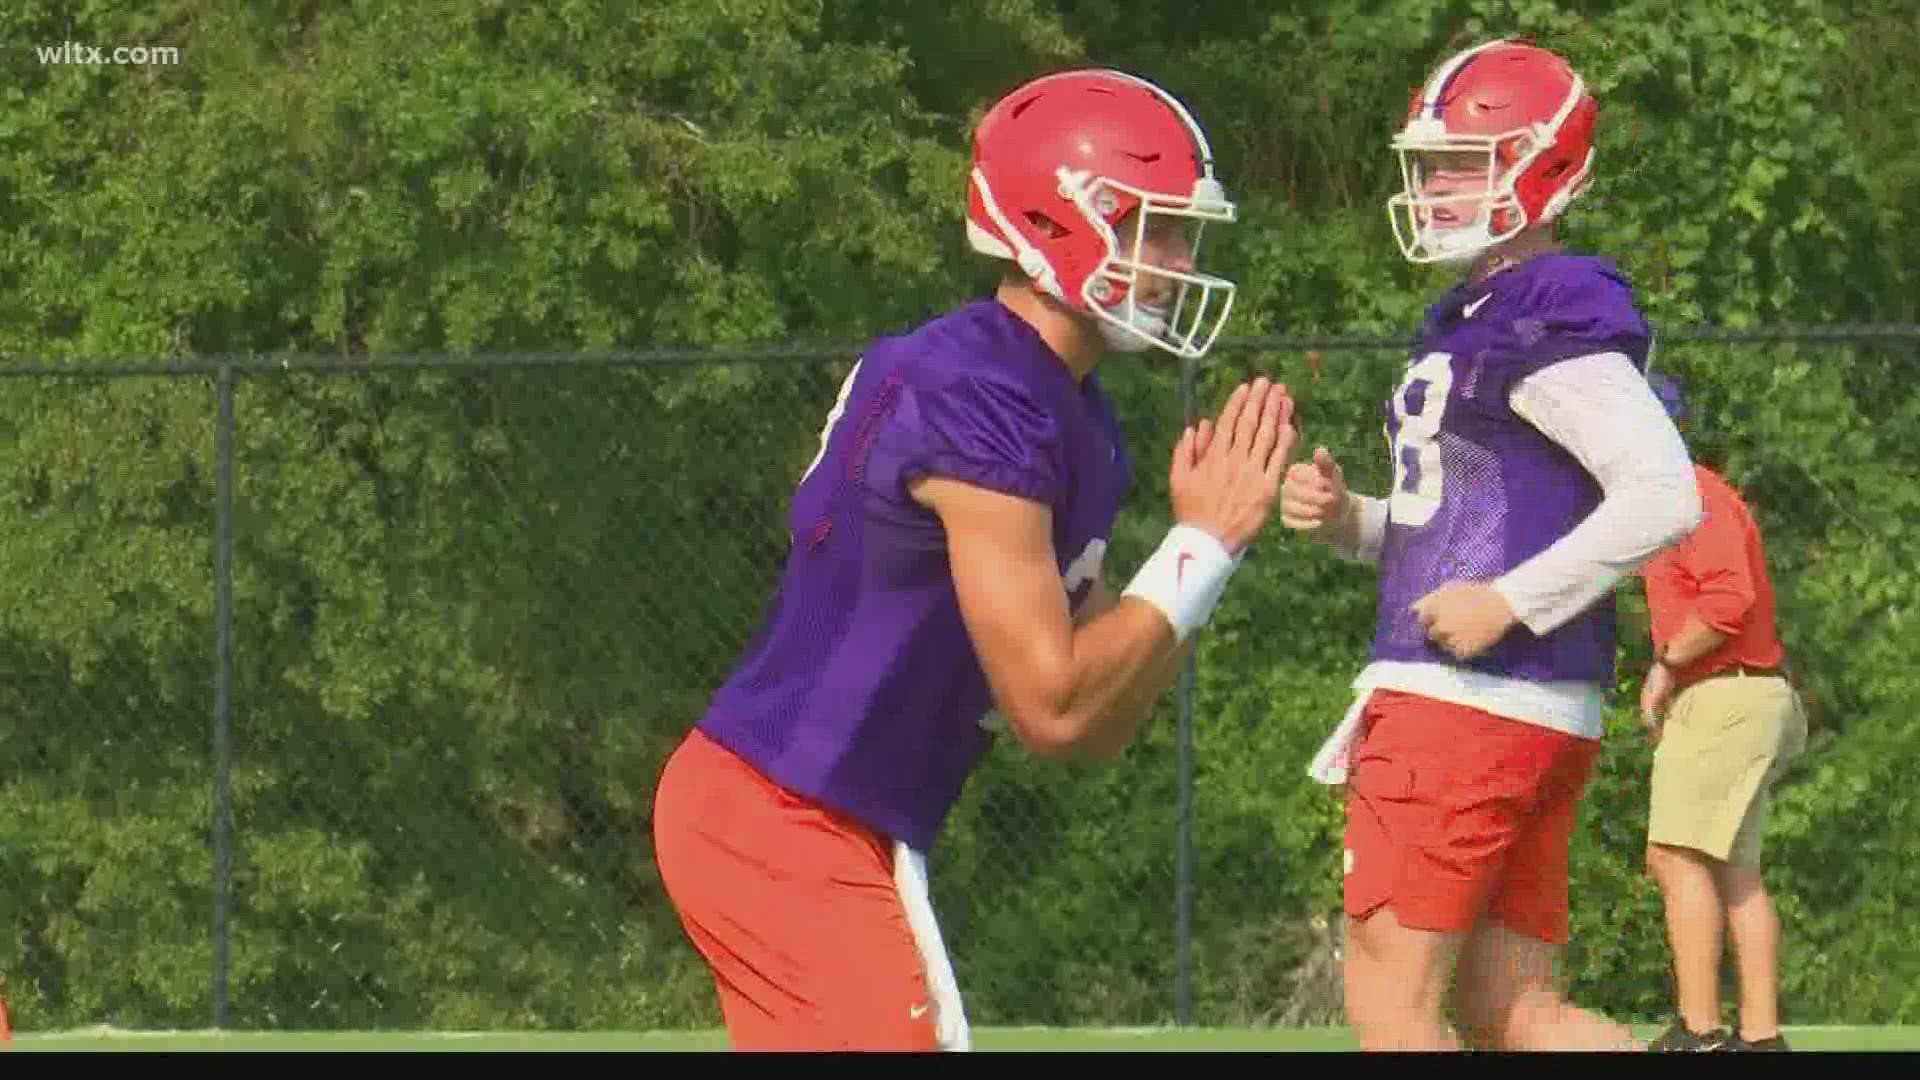 Clemson kicked off preseason practice Friday and a lot of attention is being paid to freshman quarterback Cade Klubnik.